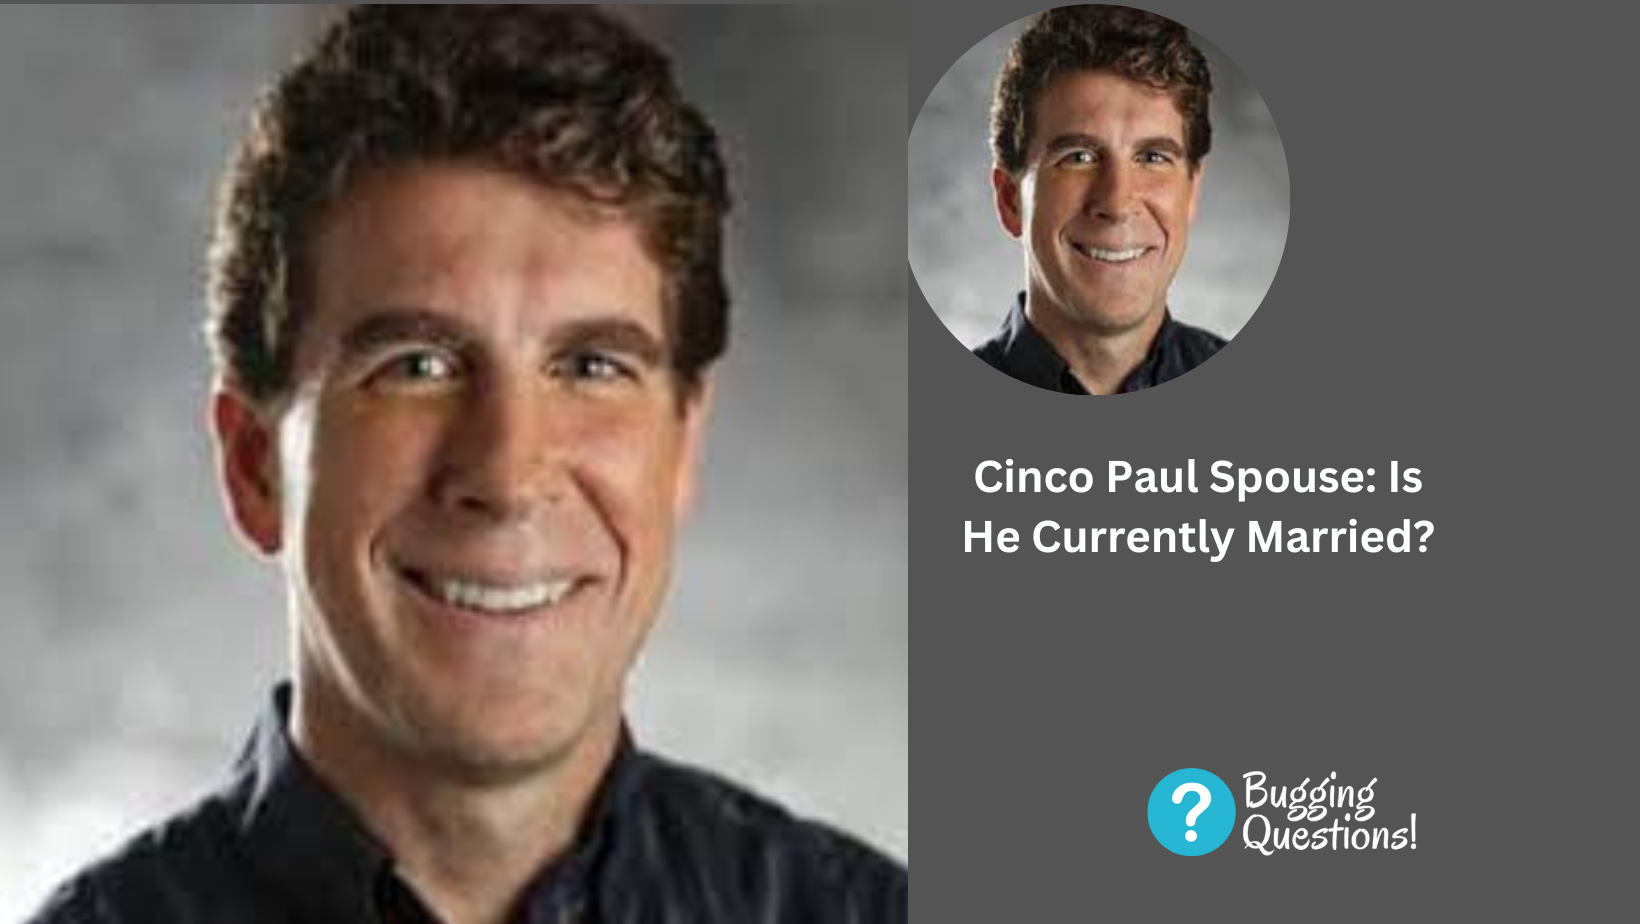 Cinco Paul Spouse: Is He Currently Married?